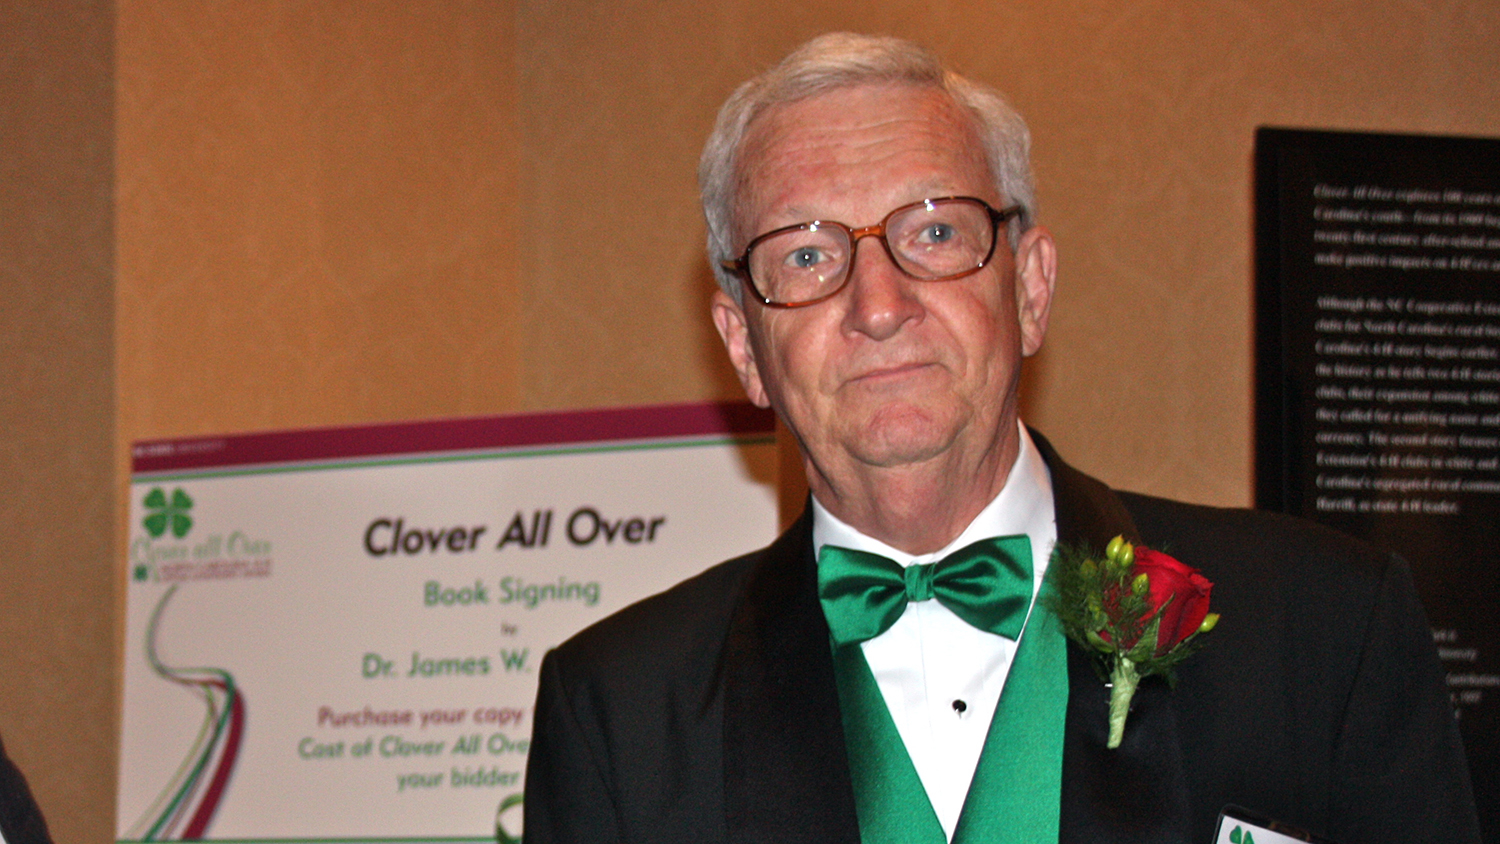 4-H Alumnus Jim Clark has written two histories of North Carolina 4-H, giving back to an organization that deeply influenced his life.   